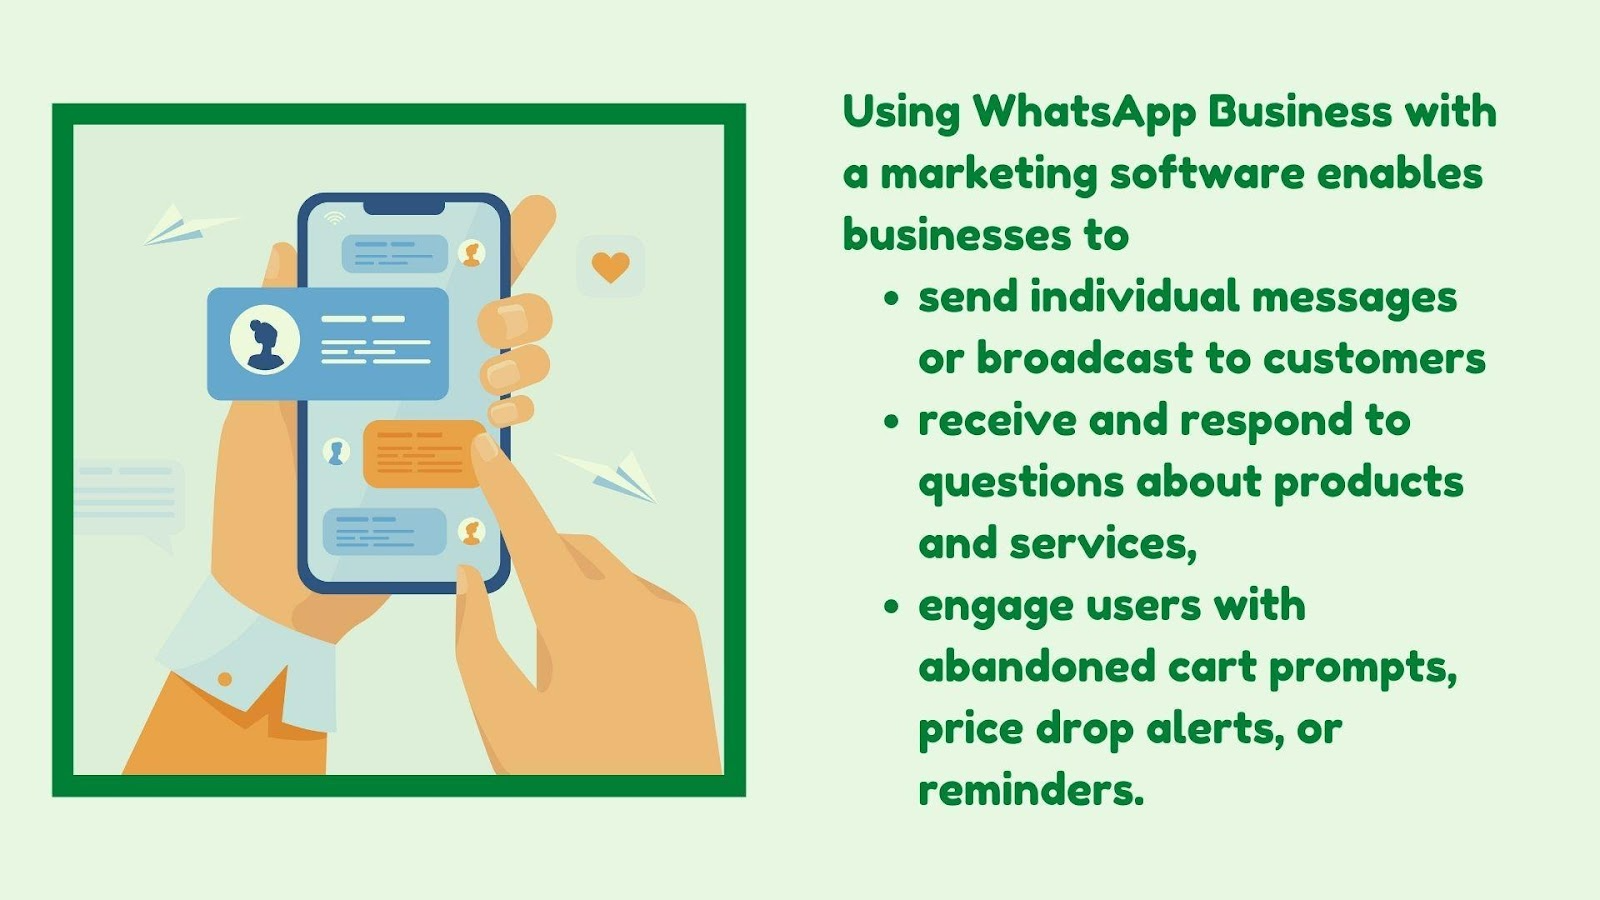 Using WhatsApp Business with marketing software enables businesses to send individual messages or broadcast to customers, receive and respond to questions about products and services, and engage users with abandoned cart prompts, price drop alerts, or reminders.